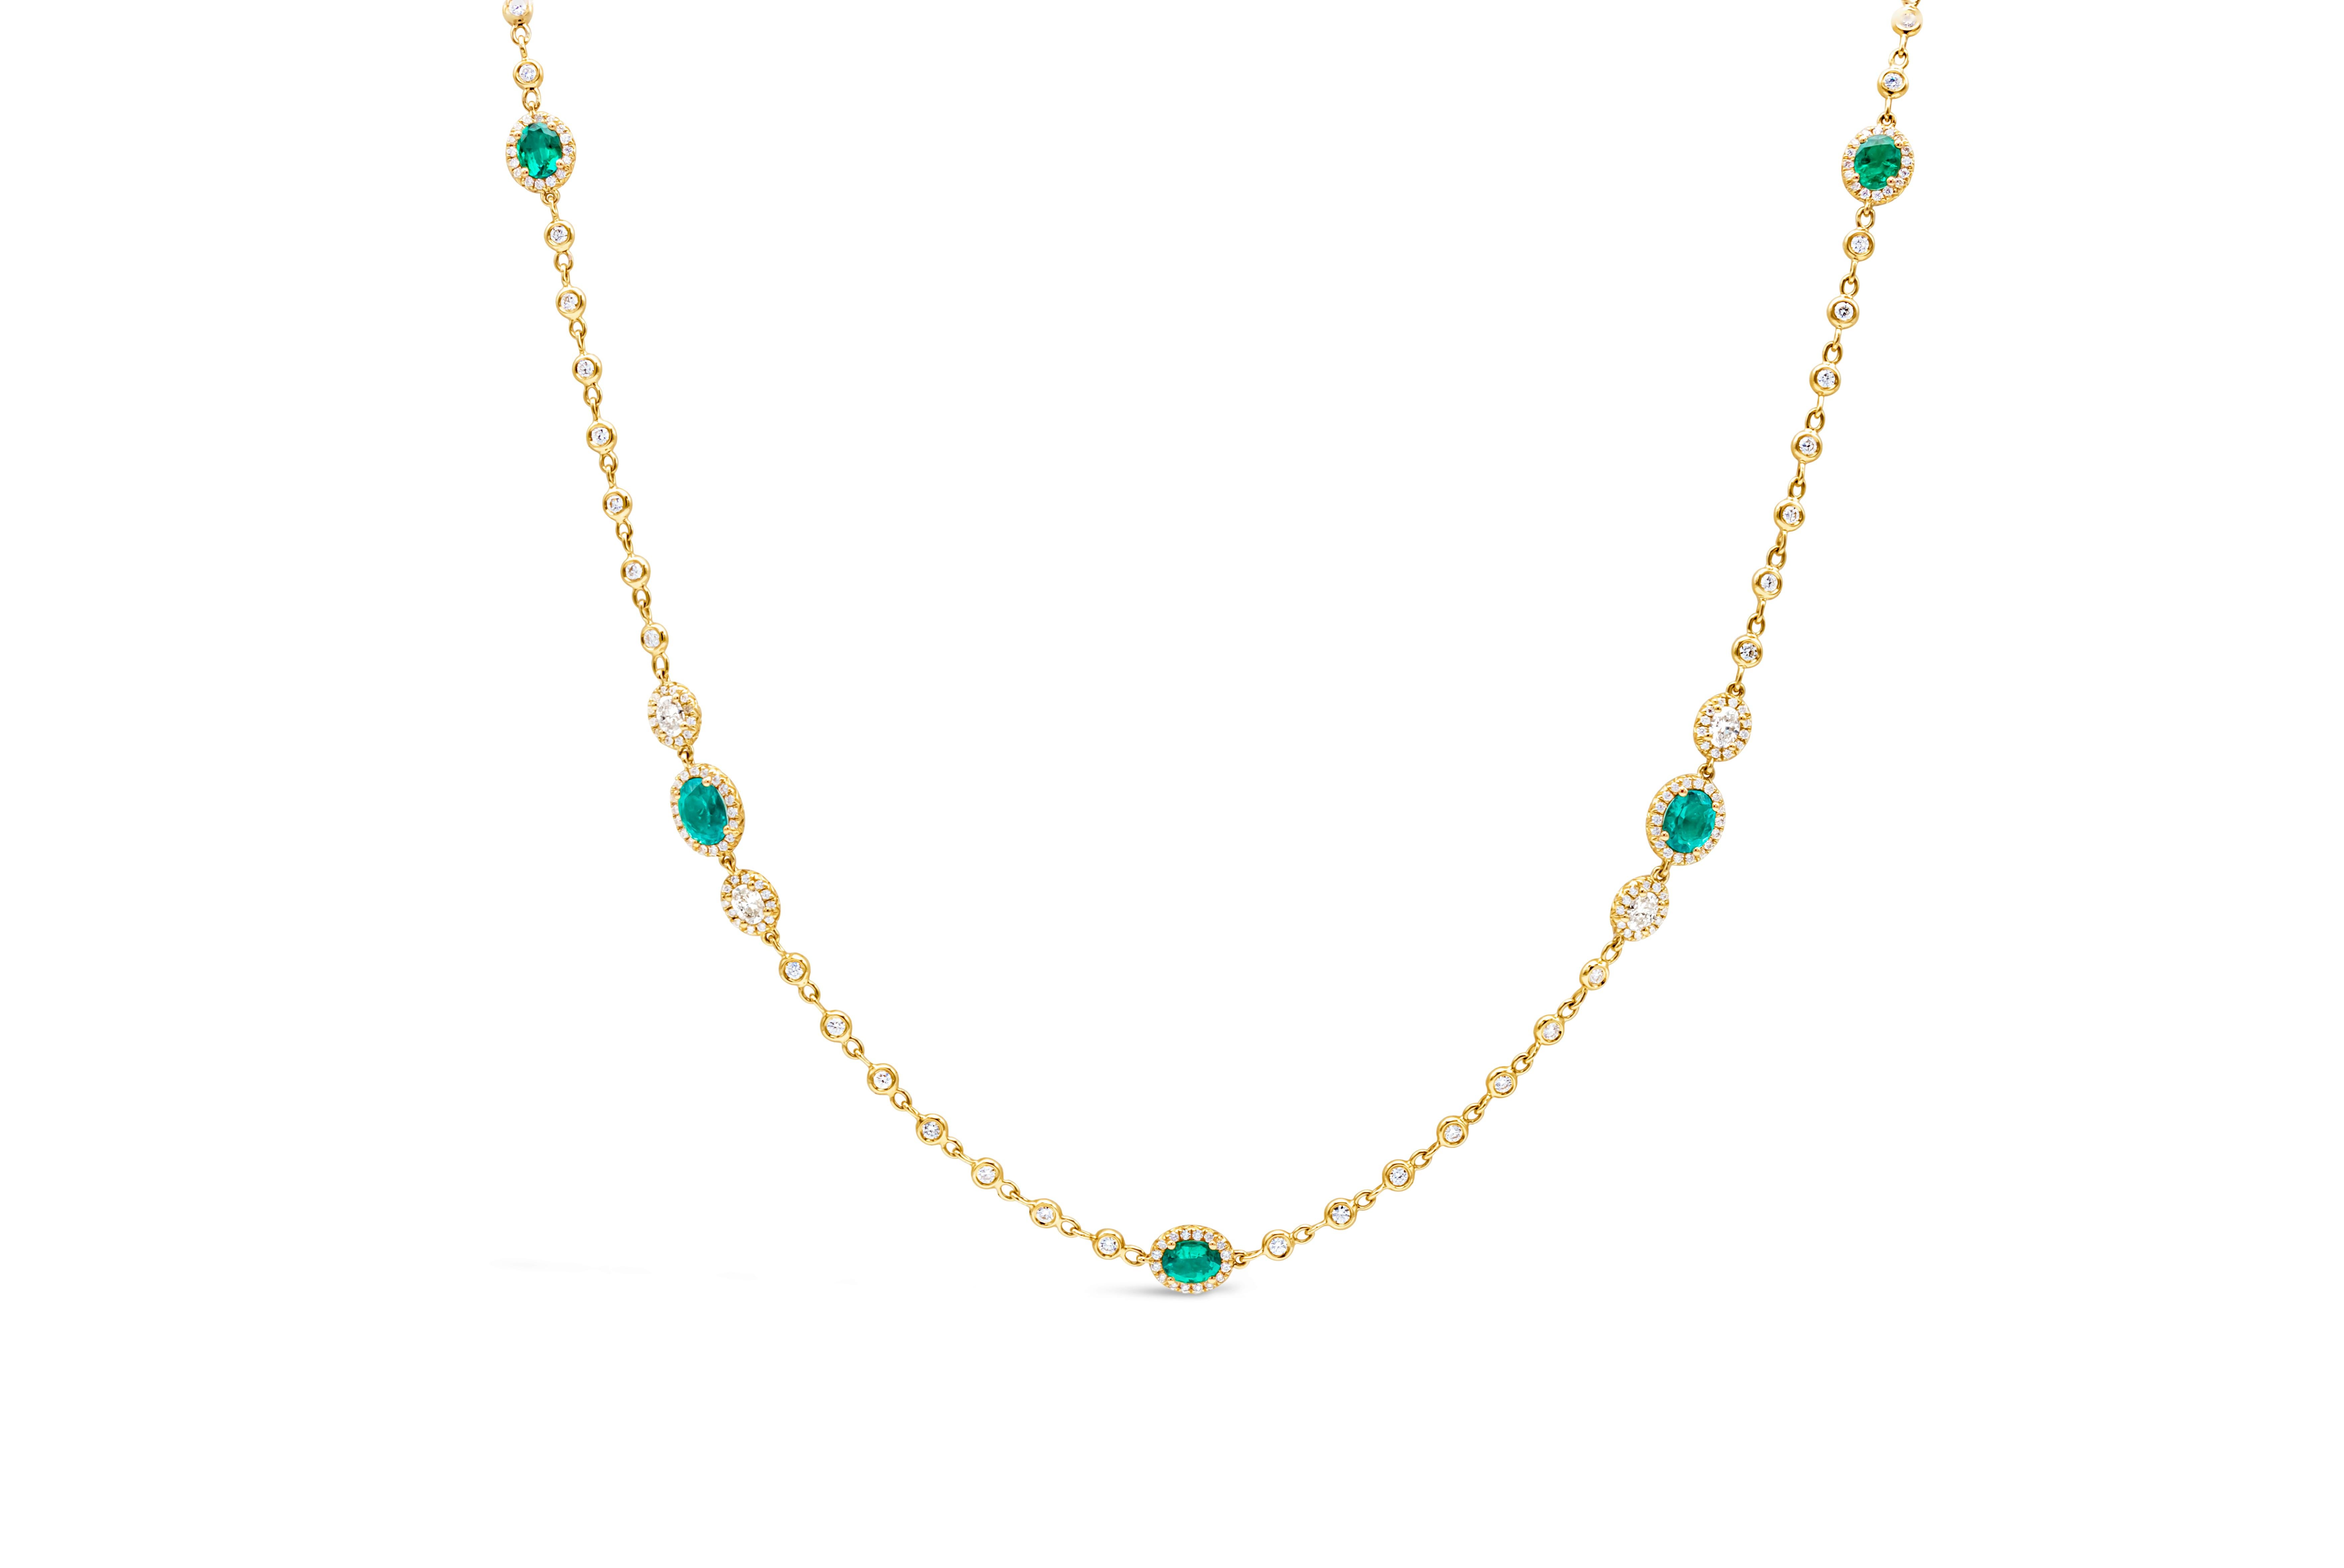 Contemporary 7.70 Carats Total Oval Cut Colombian Emerald & Diamond By the Yard Necklace For Sale